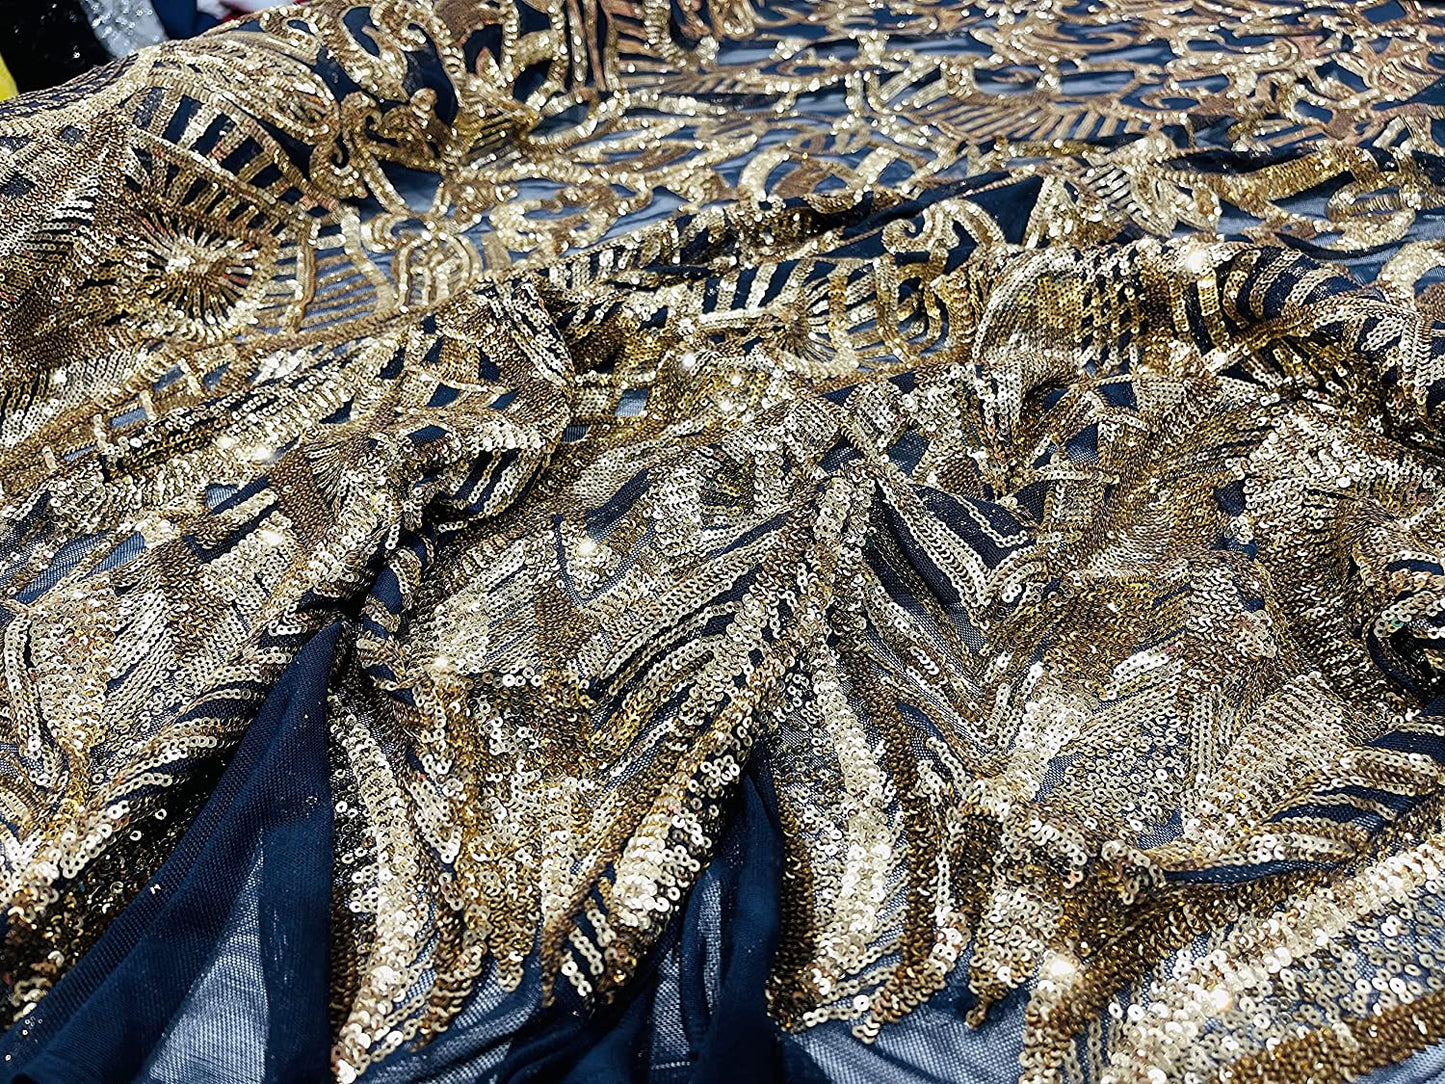 Iridescent Royalty Design On A 4 Way Stretch Mesh/Prom Fabric (1 Yard, Gold on Navy Blue Mesh)